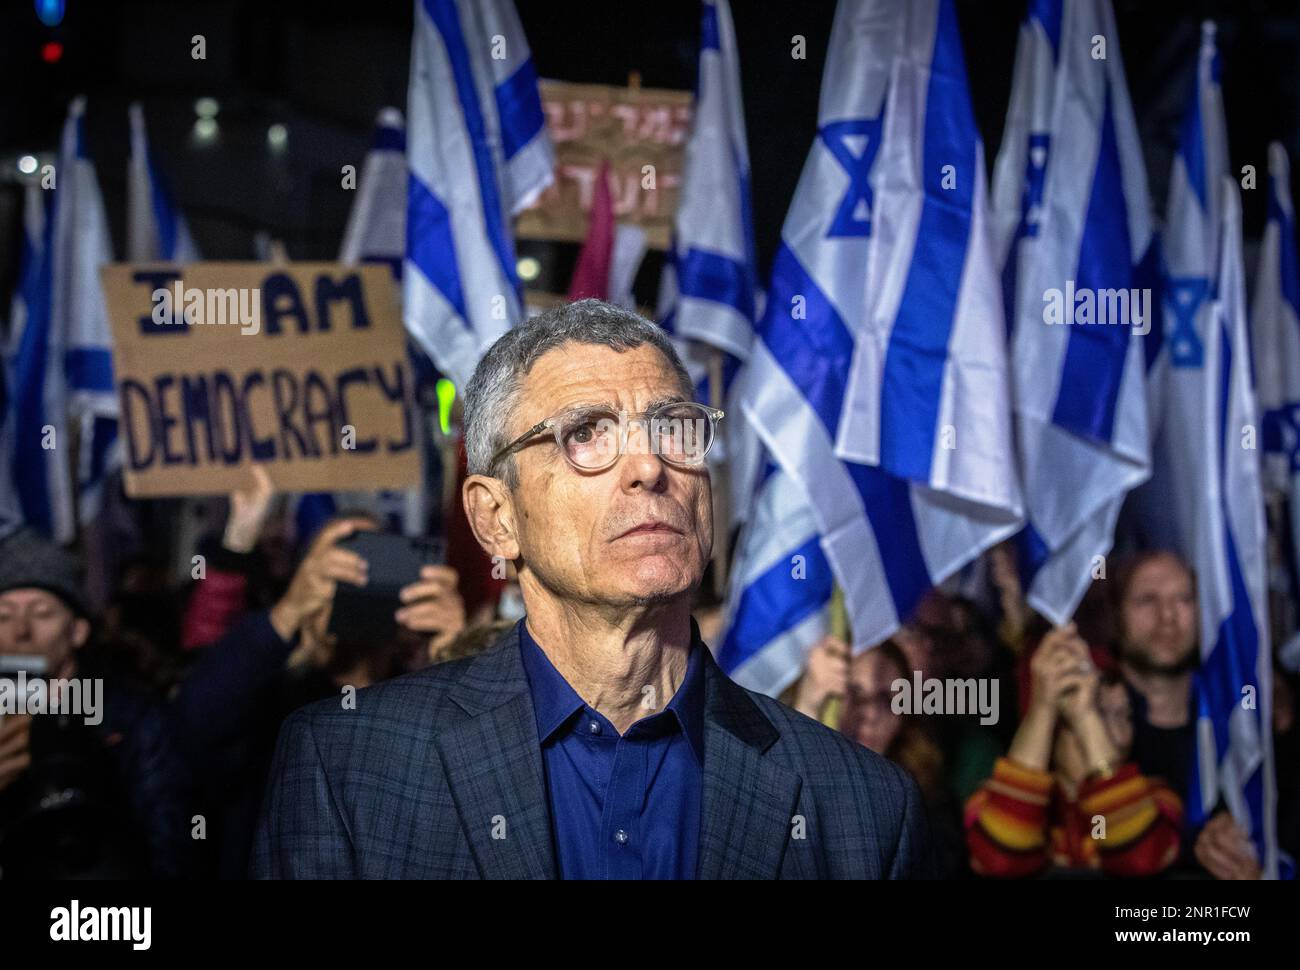 Tel Aviv, Israel. 25th Feb, 2023. President of the Union for Reform Judaism, Rabbi Richard Jacobs seen during the protest. Masses of Israelis took part in protests Saturday evening for the eighth consecutive week against the government's efforts to radically remake the country's justice system, with estimates pointing to 130,000-160,000 in Tel Aviv and tens of thousands more around the country. (Photo by Eyal Warshavsky/SOPA Images/Sipa USA) Credit: Sipa USA/Alamy Live News Stock Photo